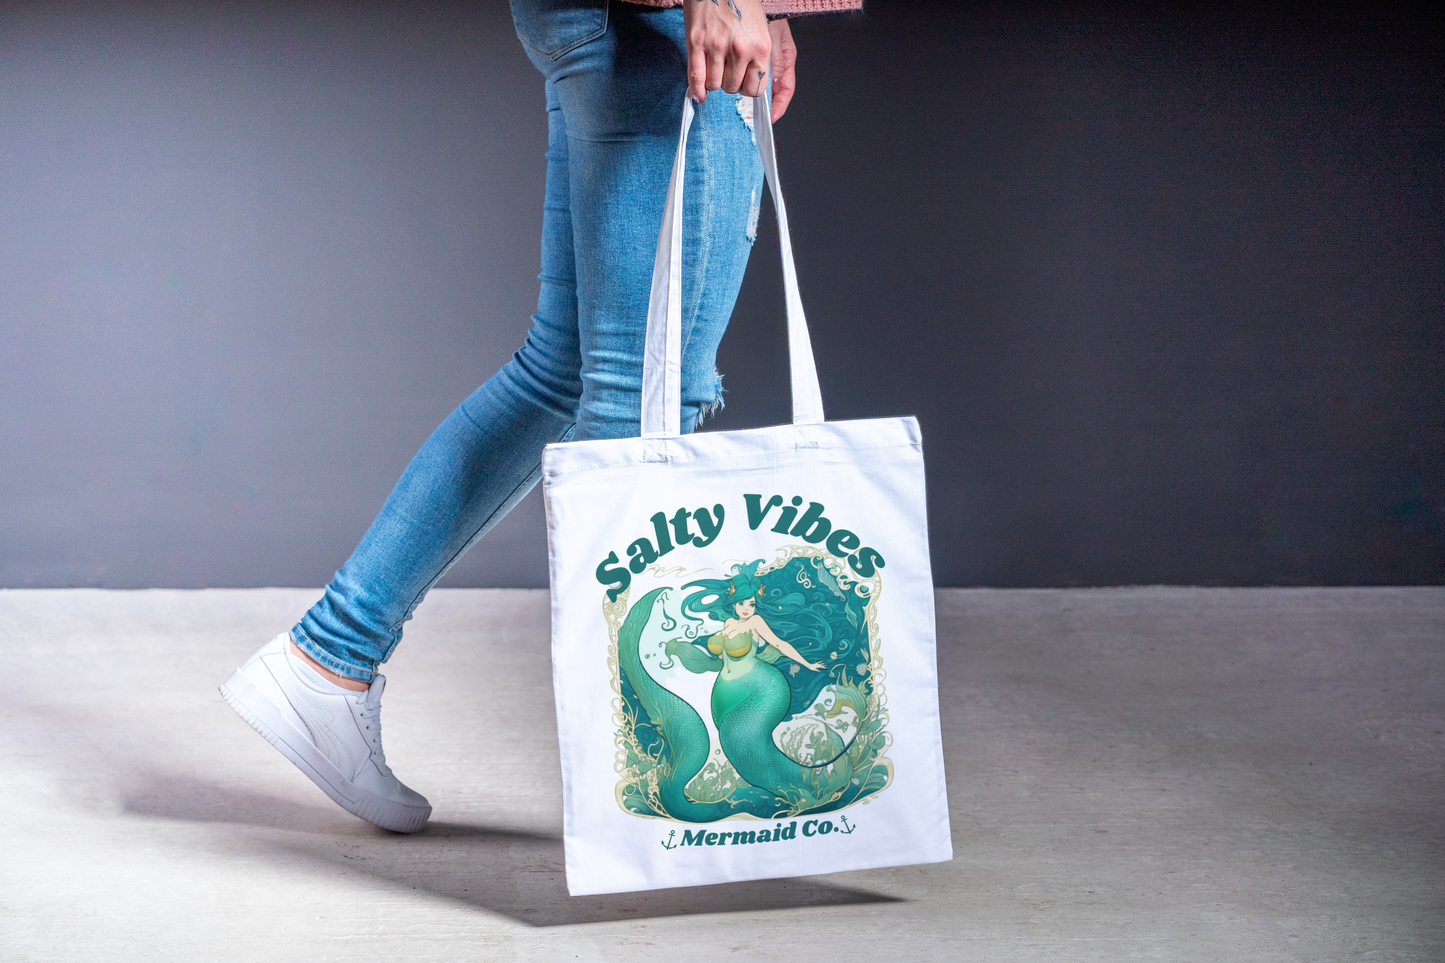 Mermaid Tote Bag Gift, Set of 3 Reusable Cotton Book Bag Beach Tote Purse, Stay Salty Vibes Mermaidcore Staycation Party Favor Swag Bags